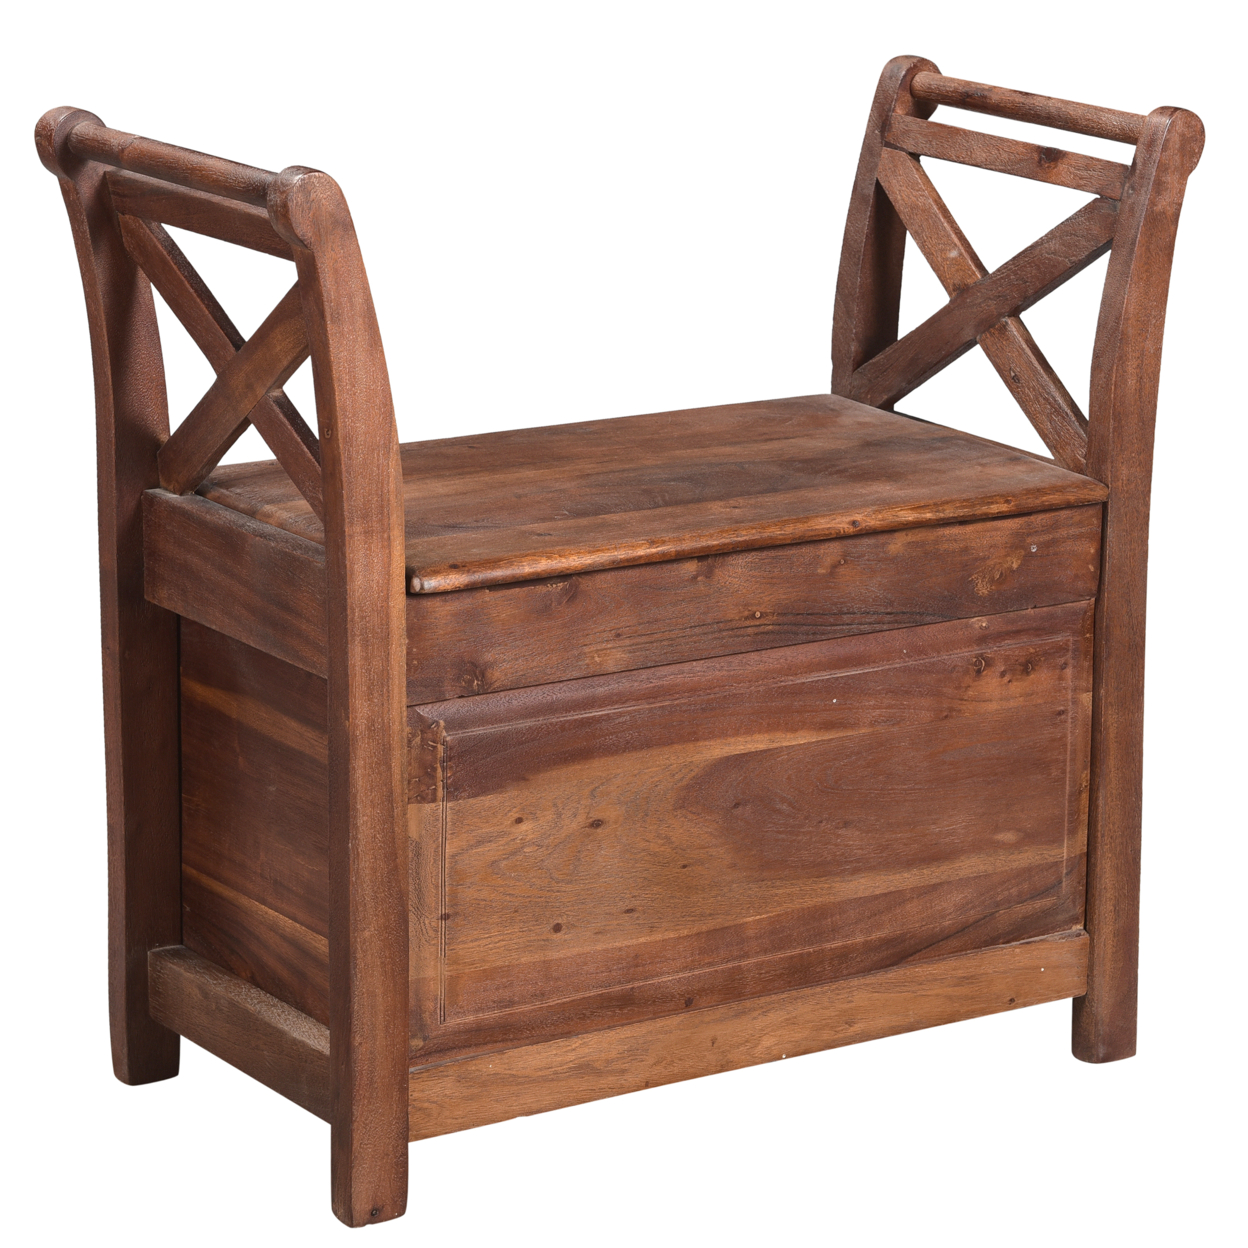 Wooden Entryway Bench with Lift Top Storage and X Shape Flared Sides, Dark Brown, Saltoro Sherpi